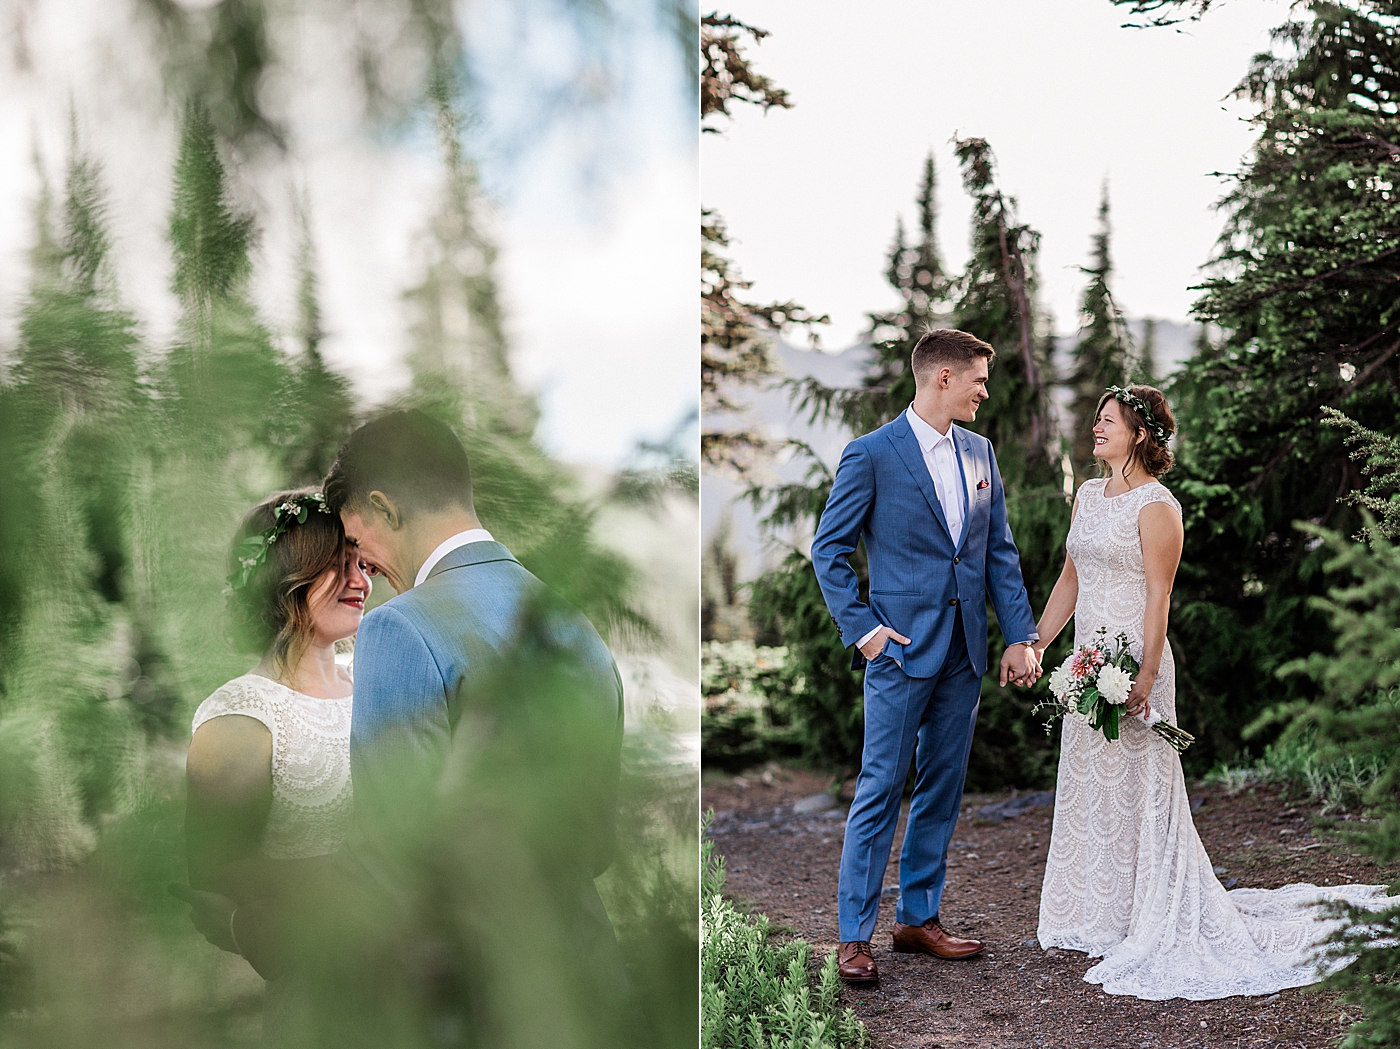 Couples first look at Mount Rainier before elopement ceremony. Photographed by PNW Elopement Photographer, Megan Montalvo Photography. 